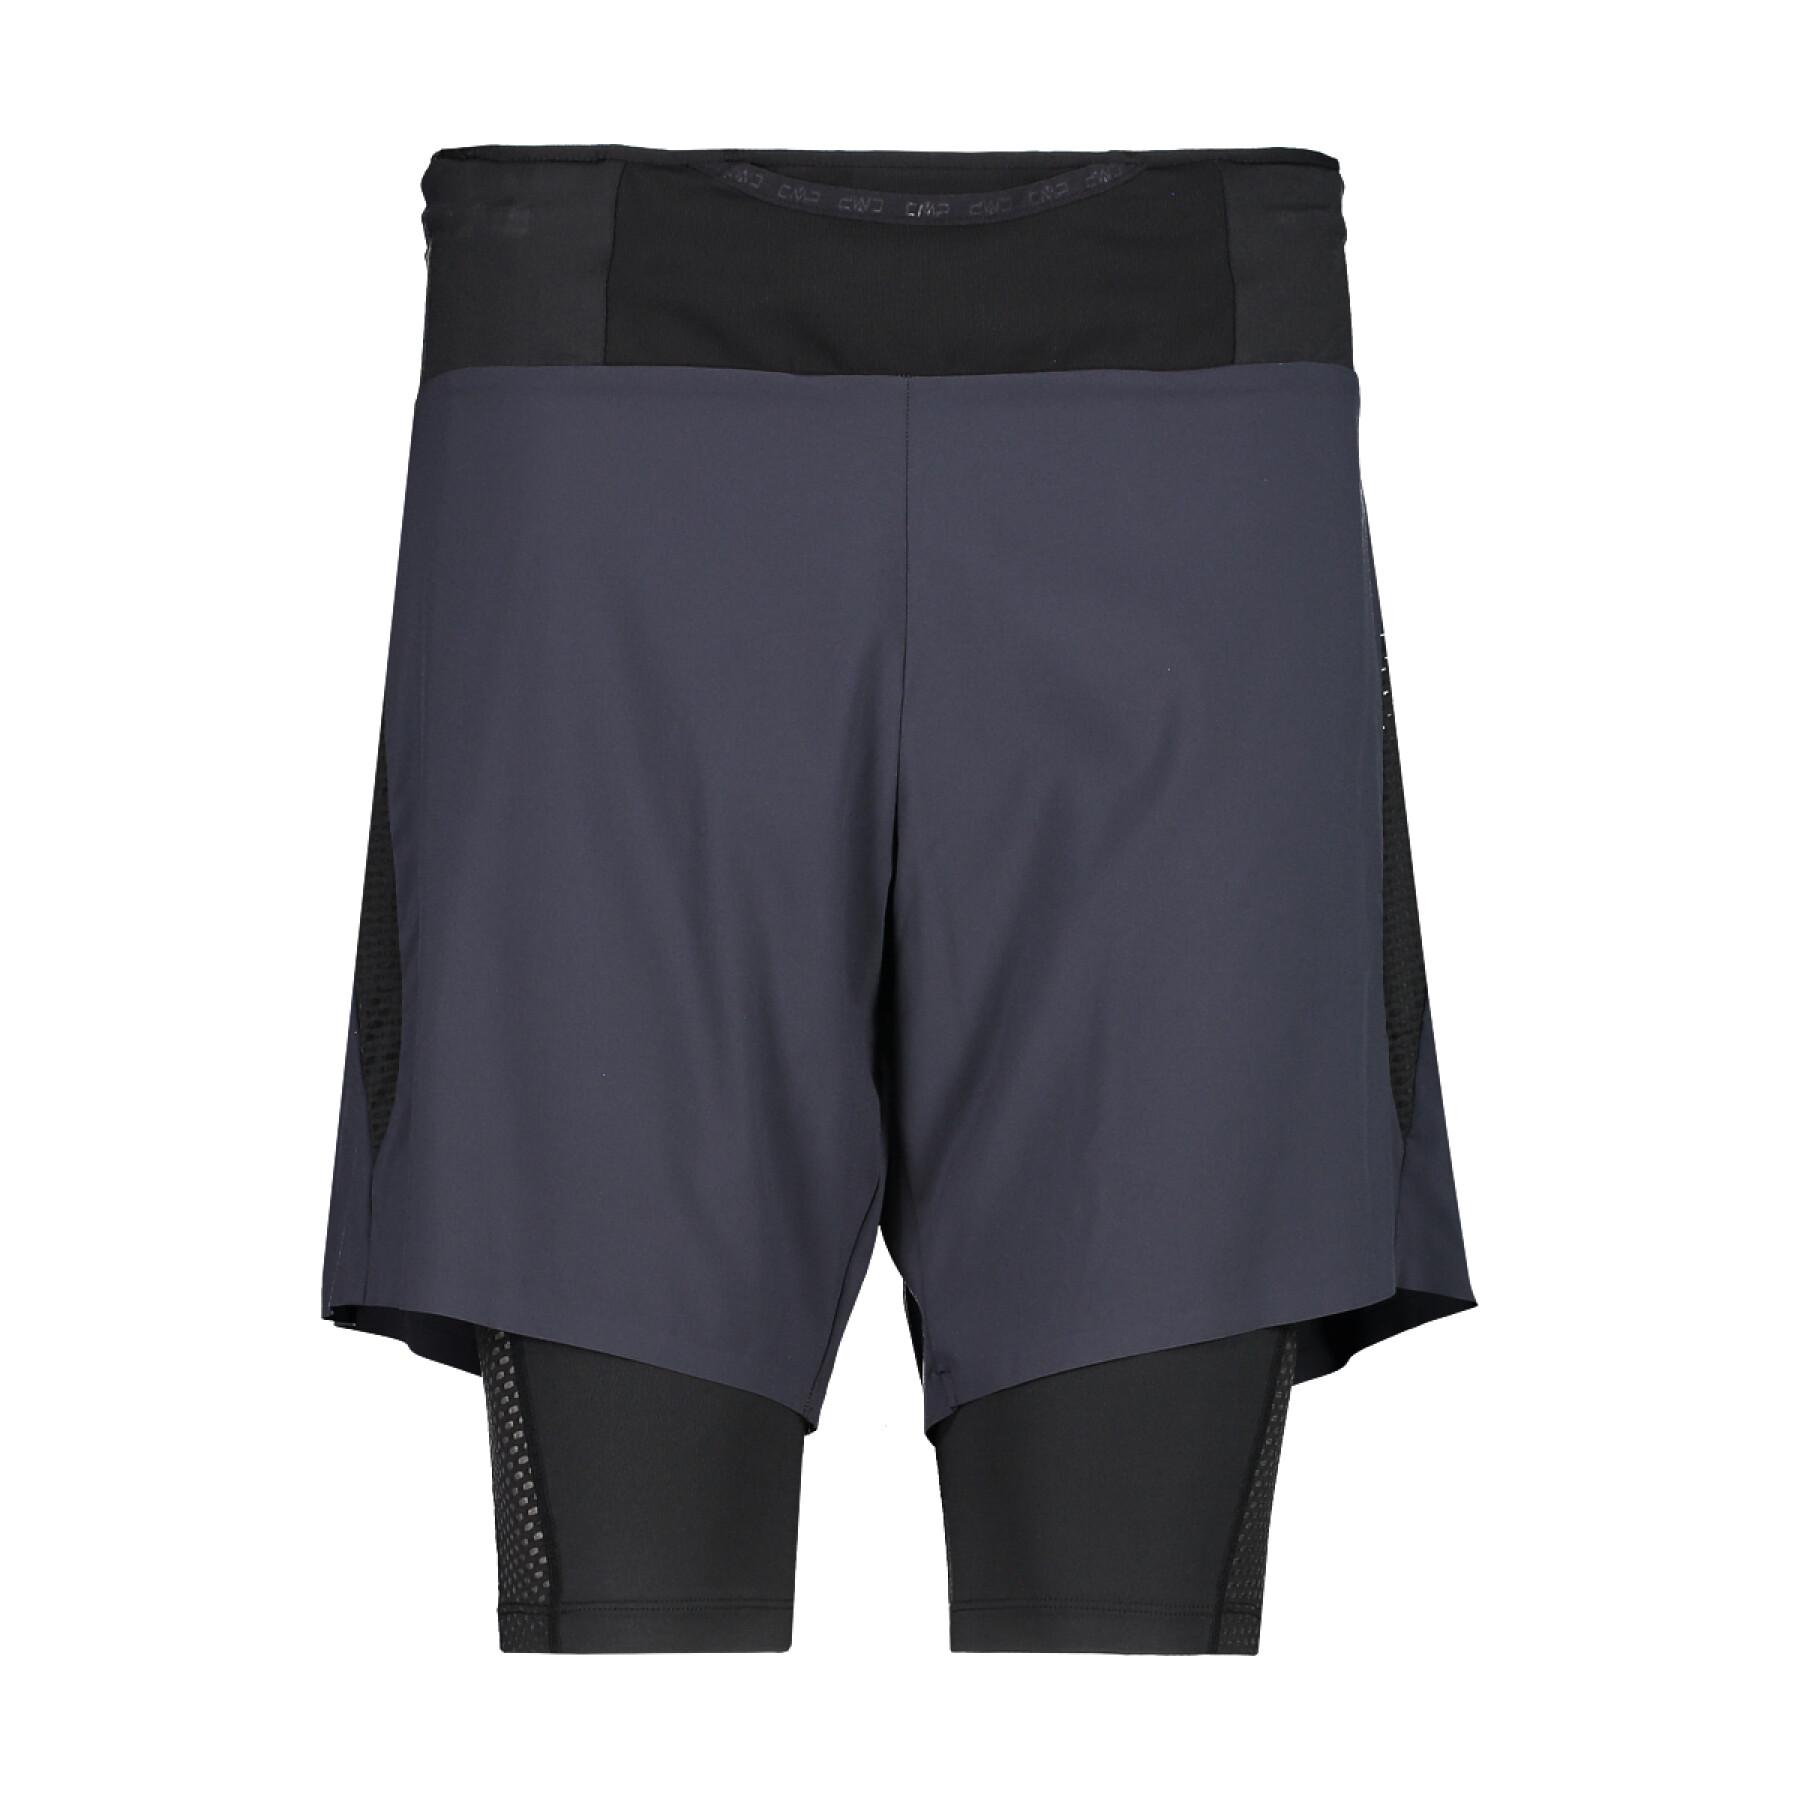 2 in 1 shorts CMP